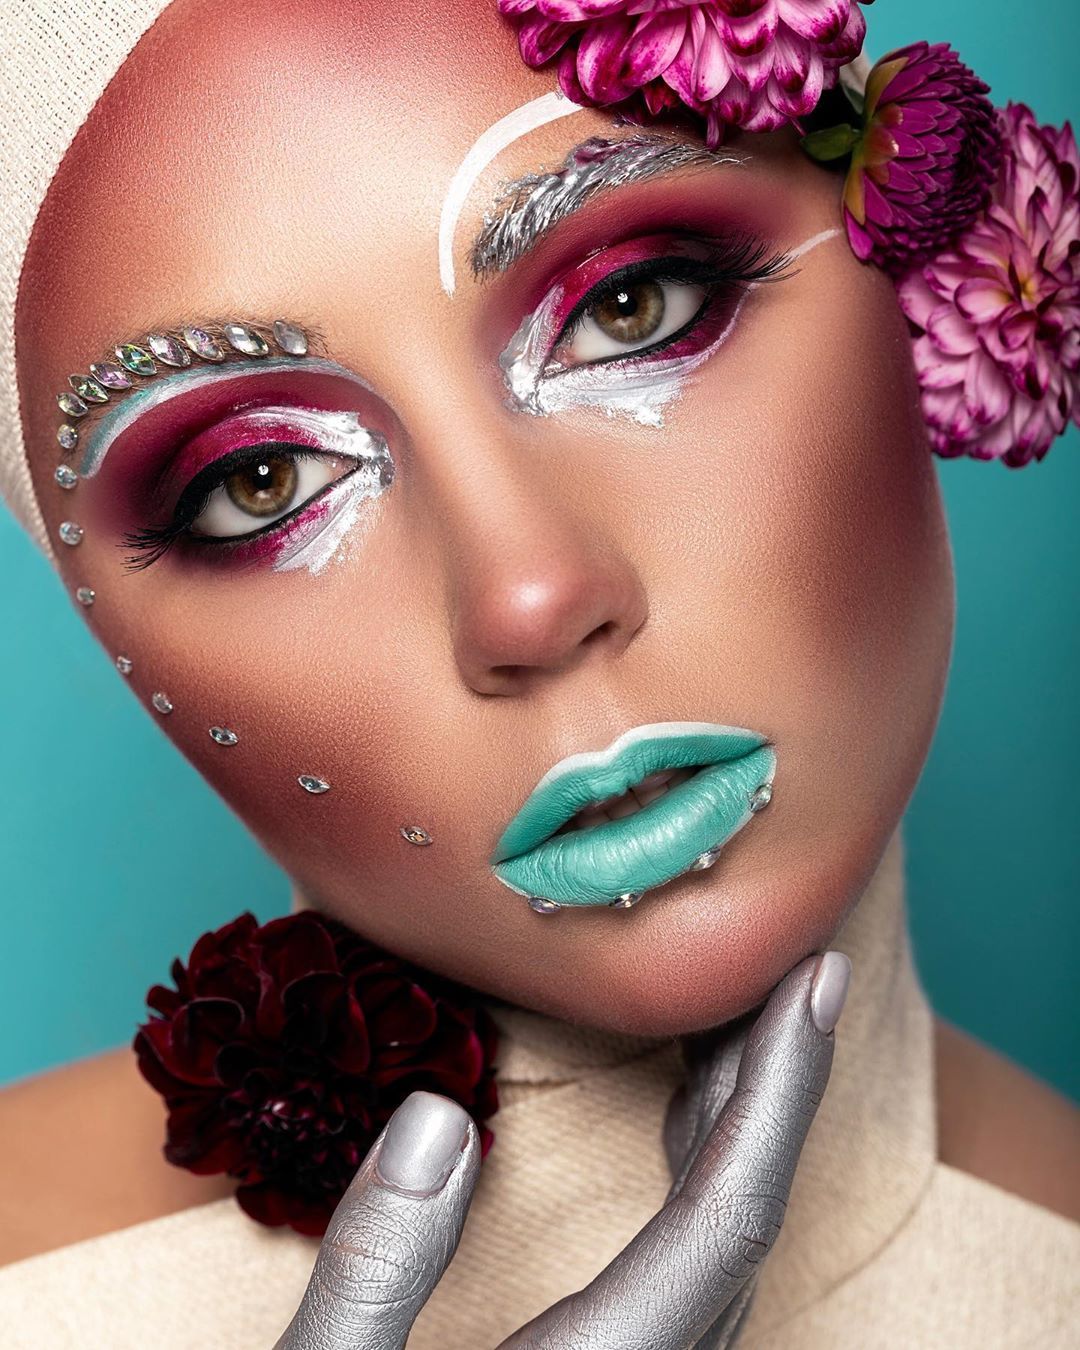 Young Lady With Bright Stylish Floral Make Up